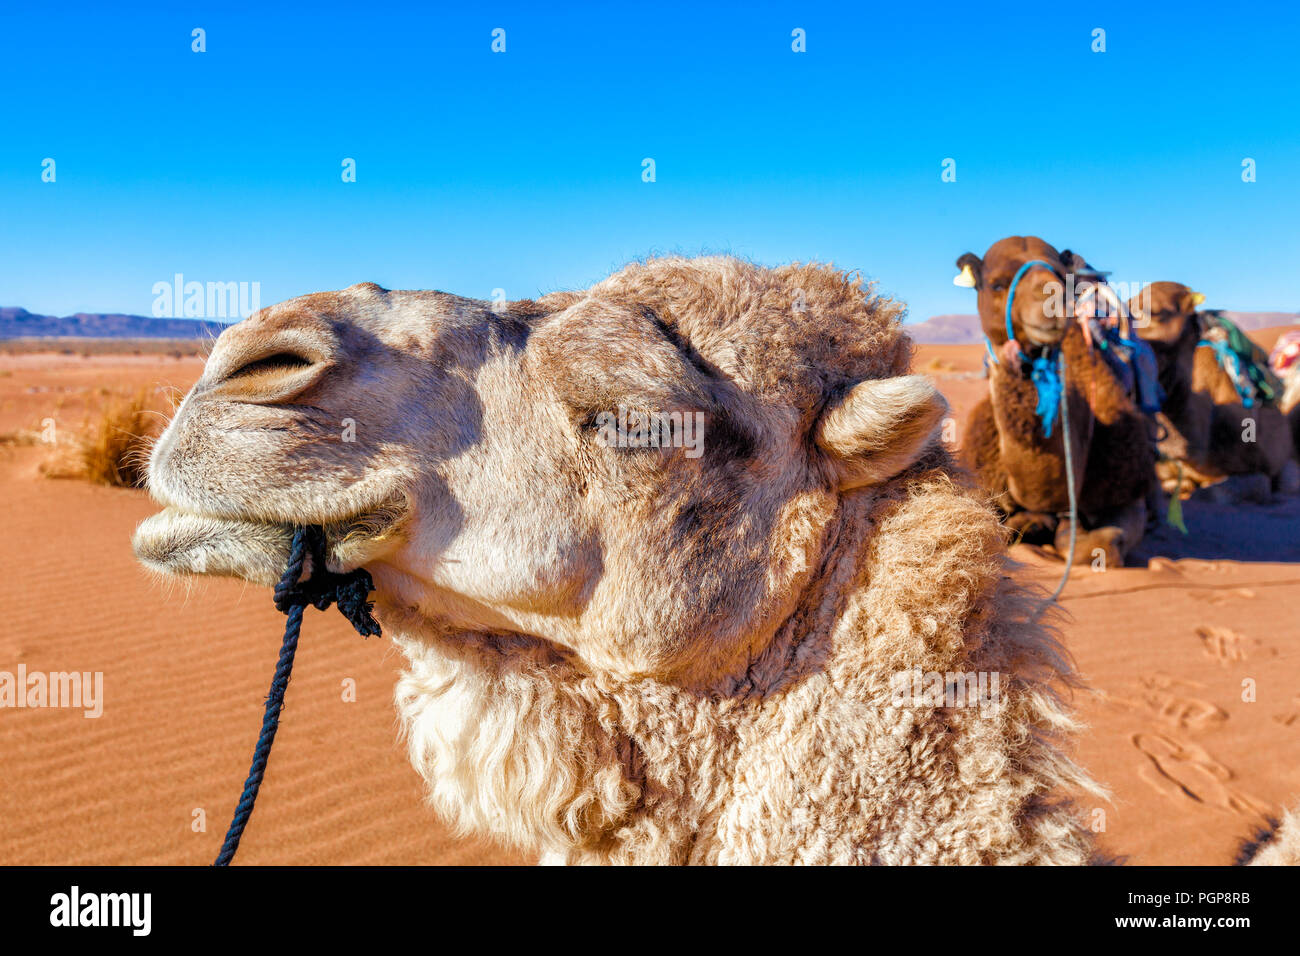 White camel face close up in the Sahara Desert, Morocco. Background of sandy dunes and blue sky Stock Photo